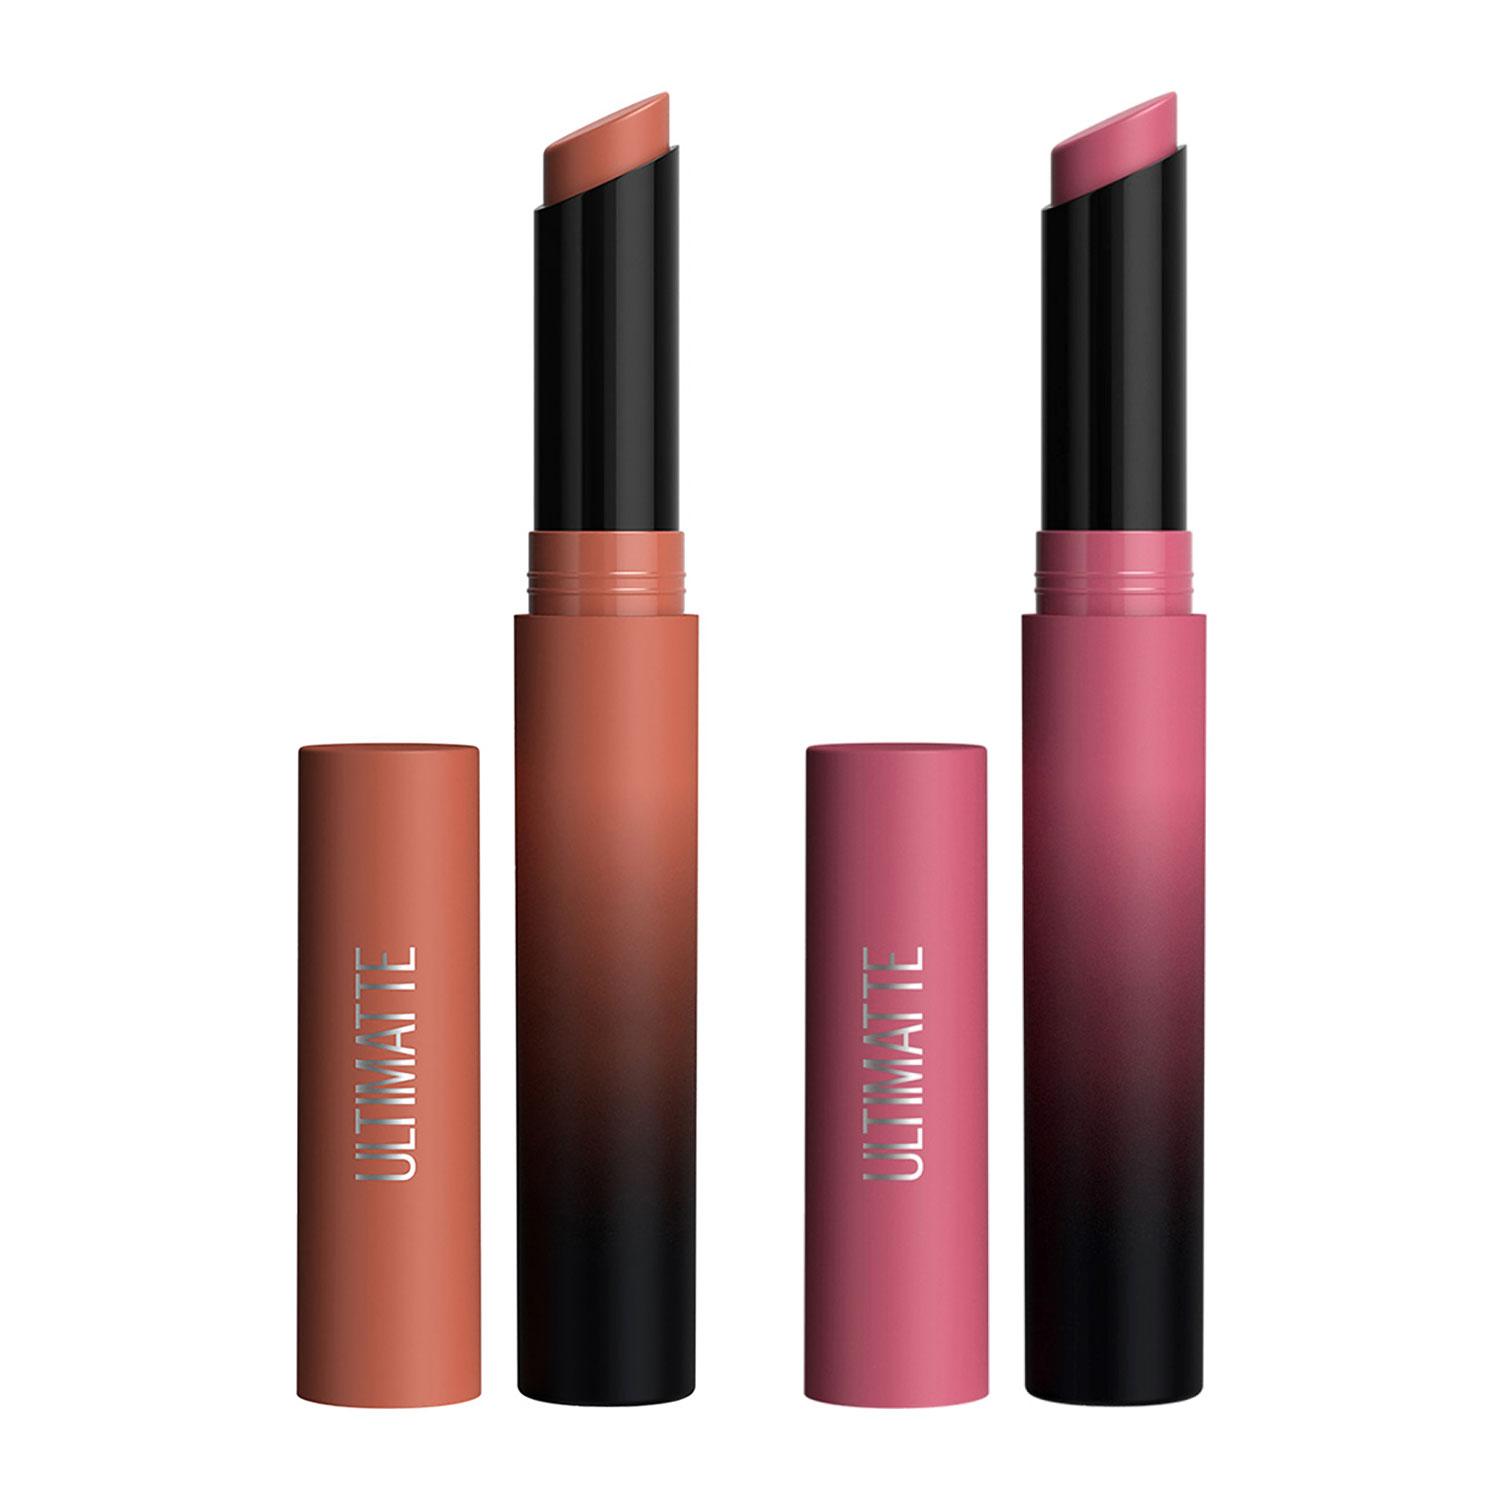 Maybelline New York | Maybelline New York Color Sensational Ultimattes Lipstick Pack of 2 (Shades 599 & 799)